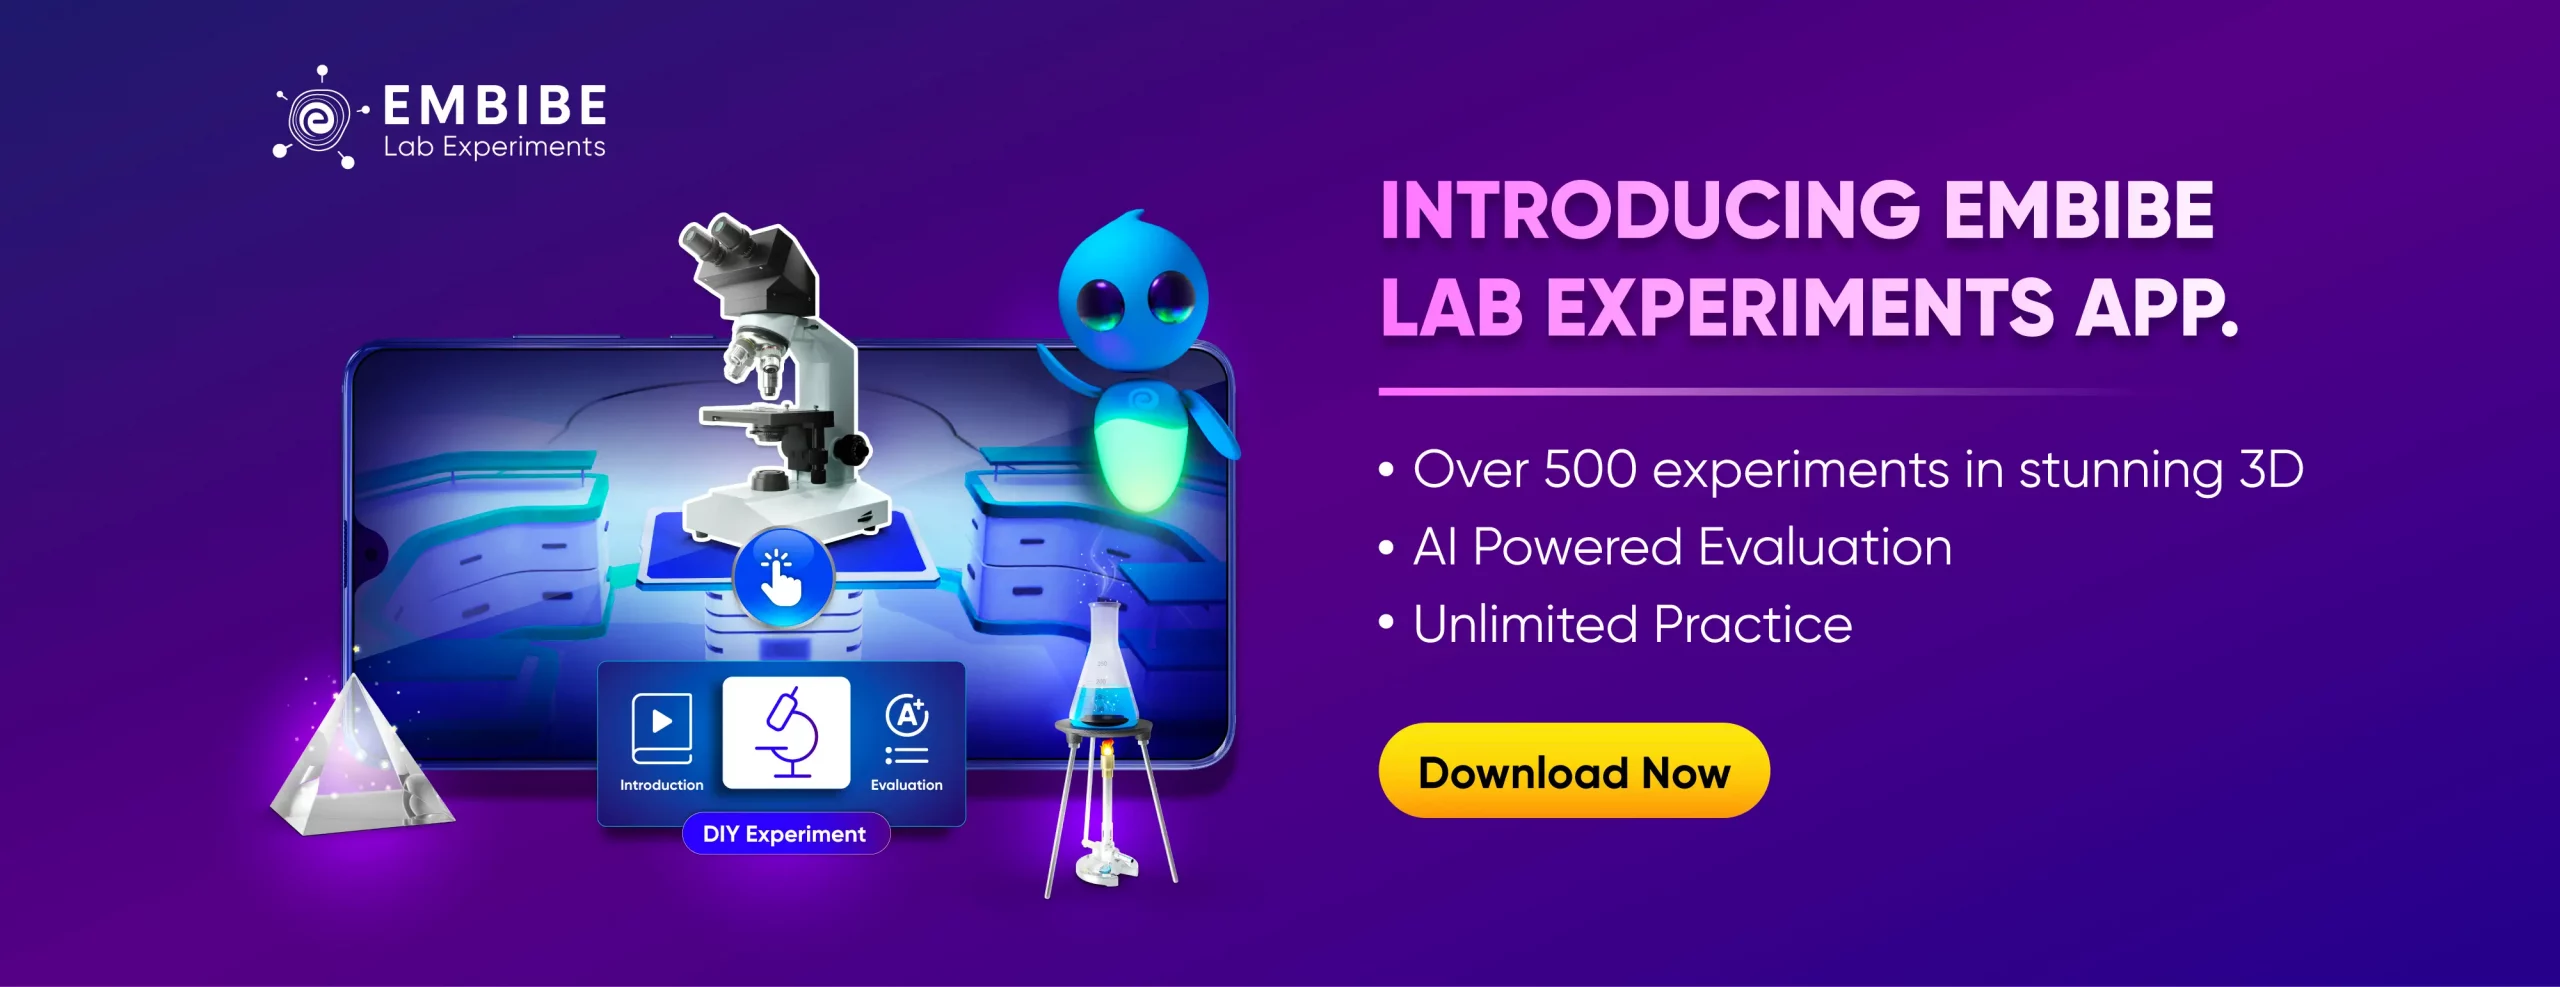 lab-experiments-generic-banner-image